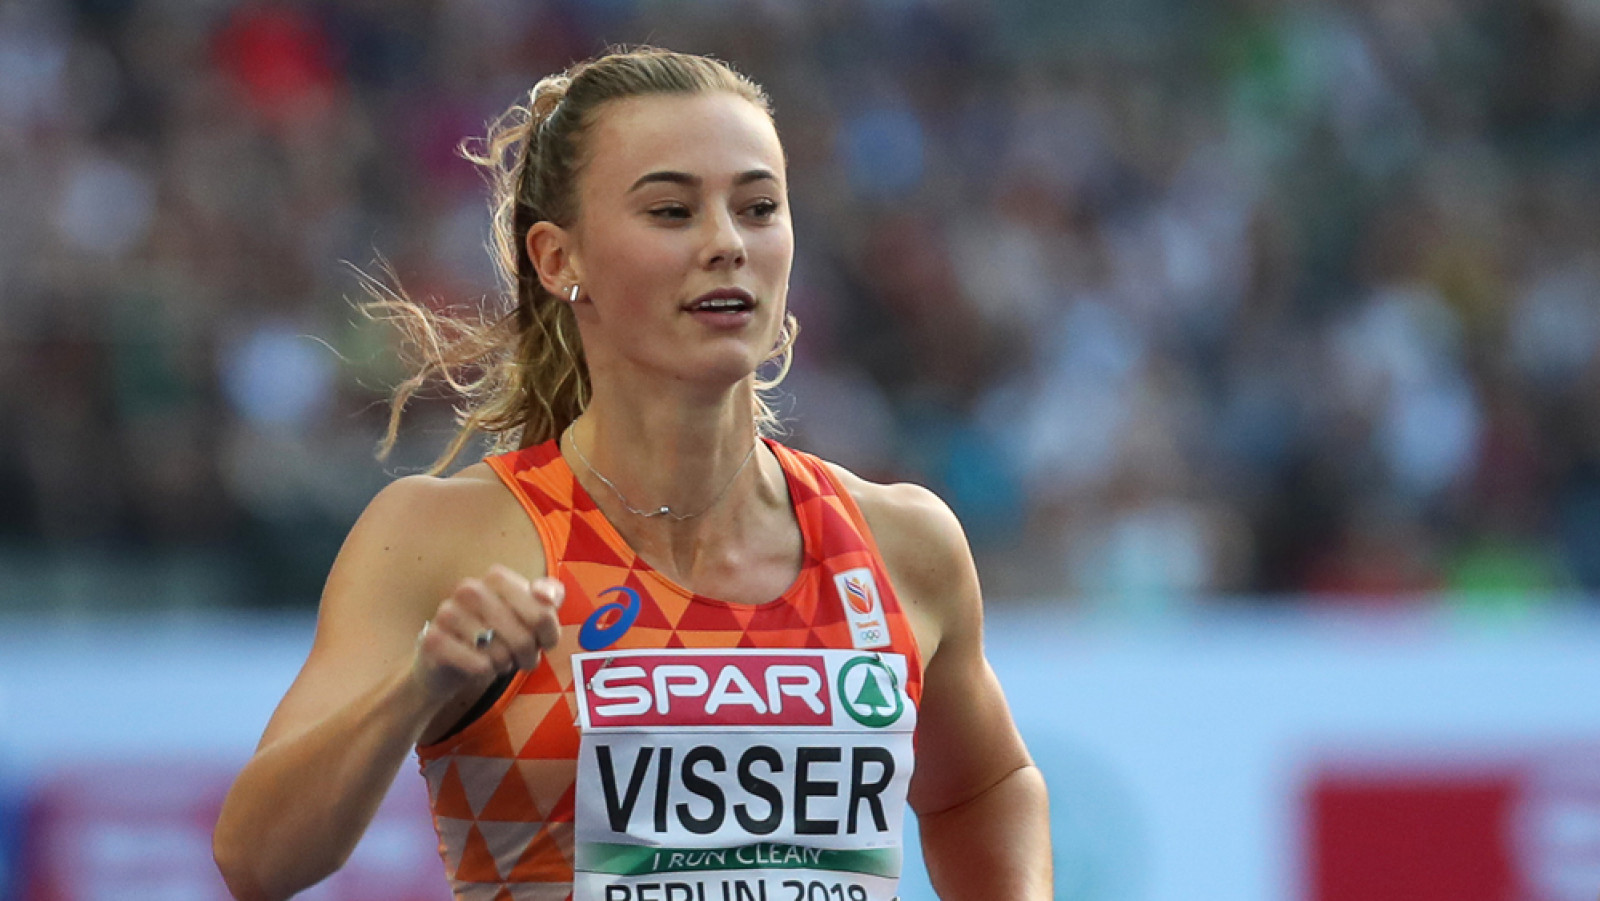 21 hours ago - athlete nadine visser was unable to obtain a medal at the ol...